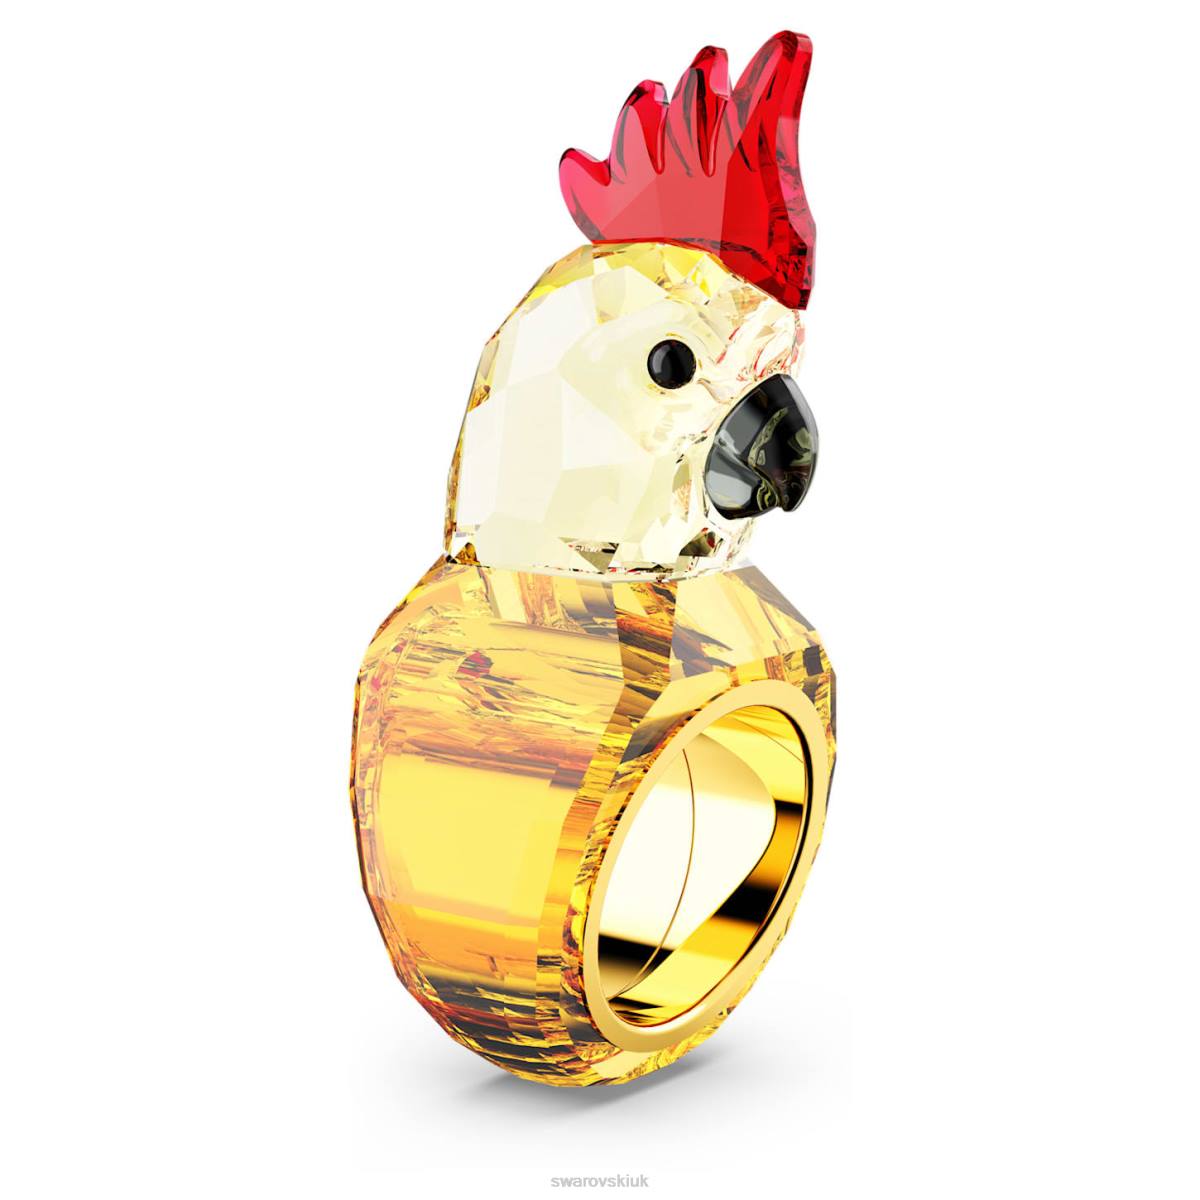 Jewelry Swarovski Idyllia cocktail ring Parrot, Multicolored, Gold-tone plated 48JX1059